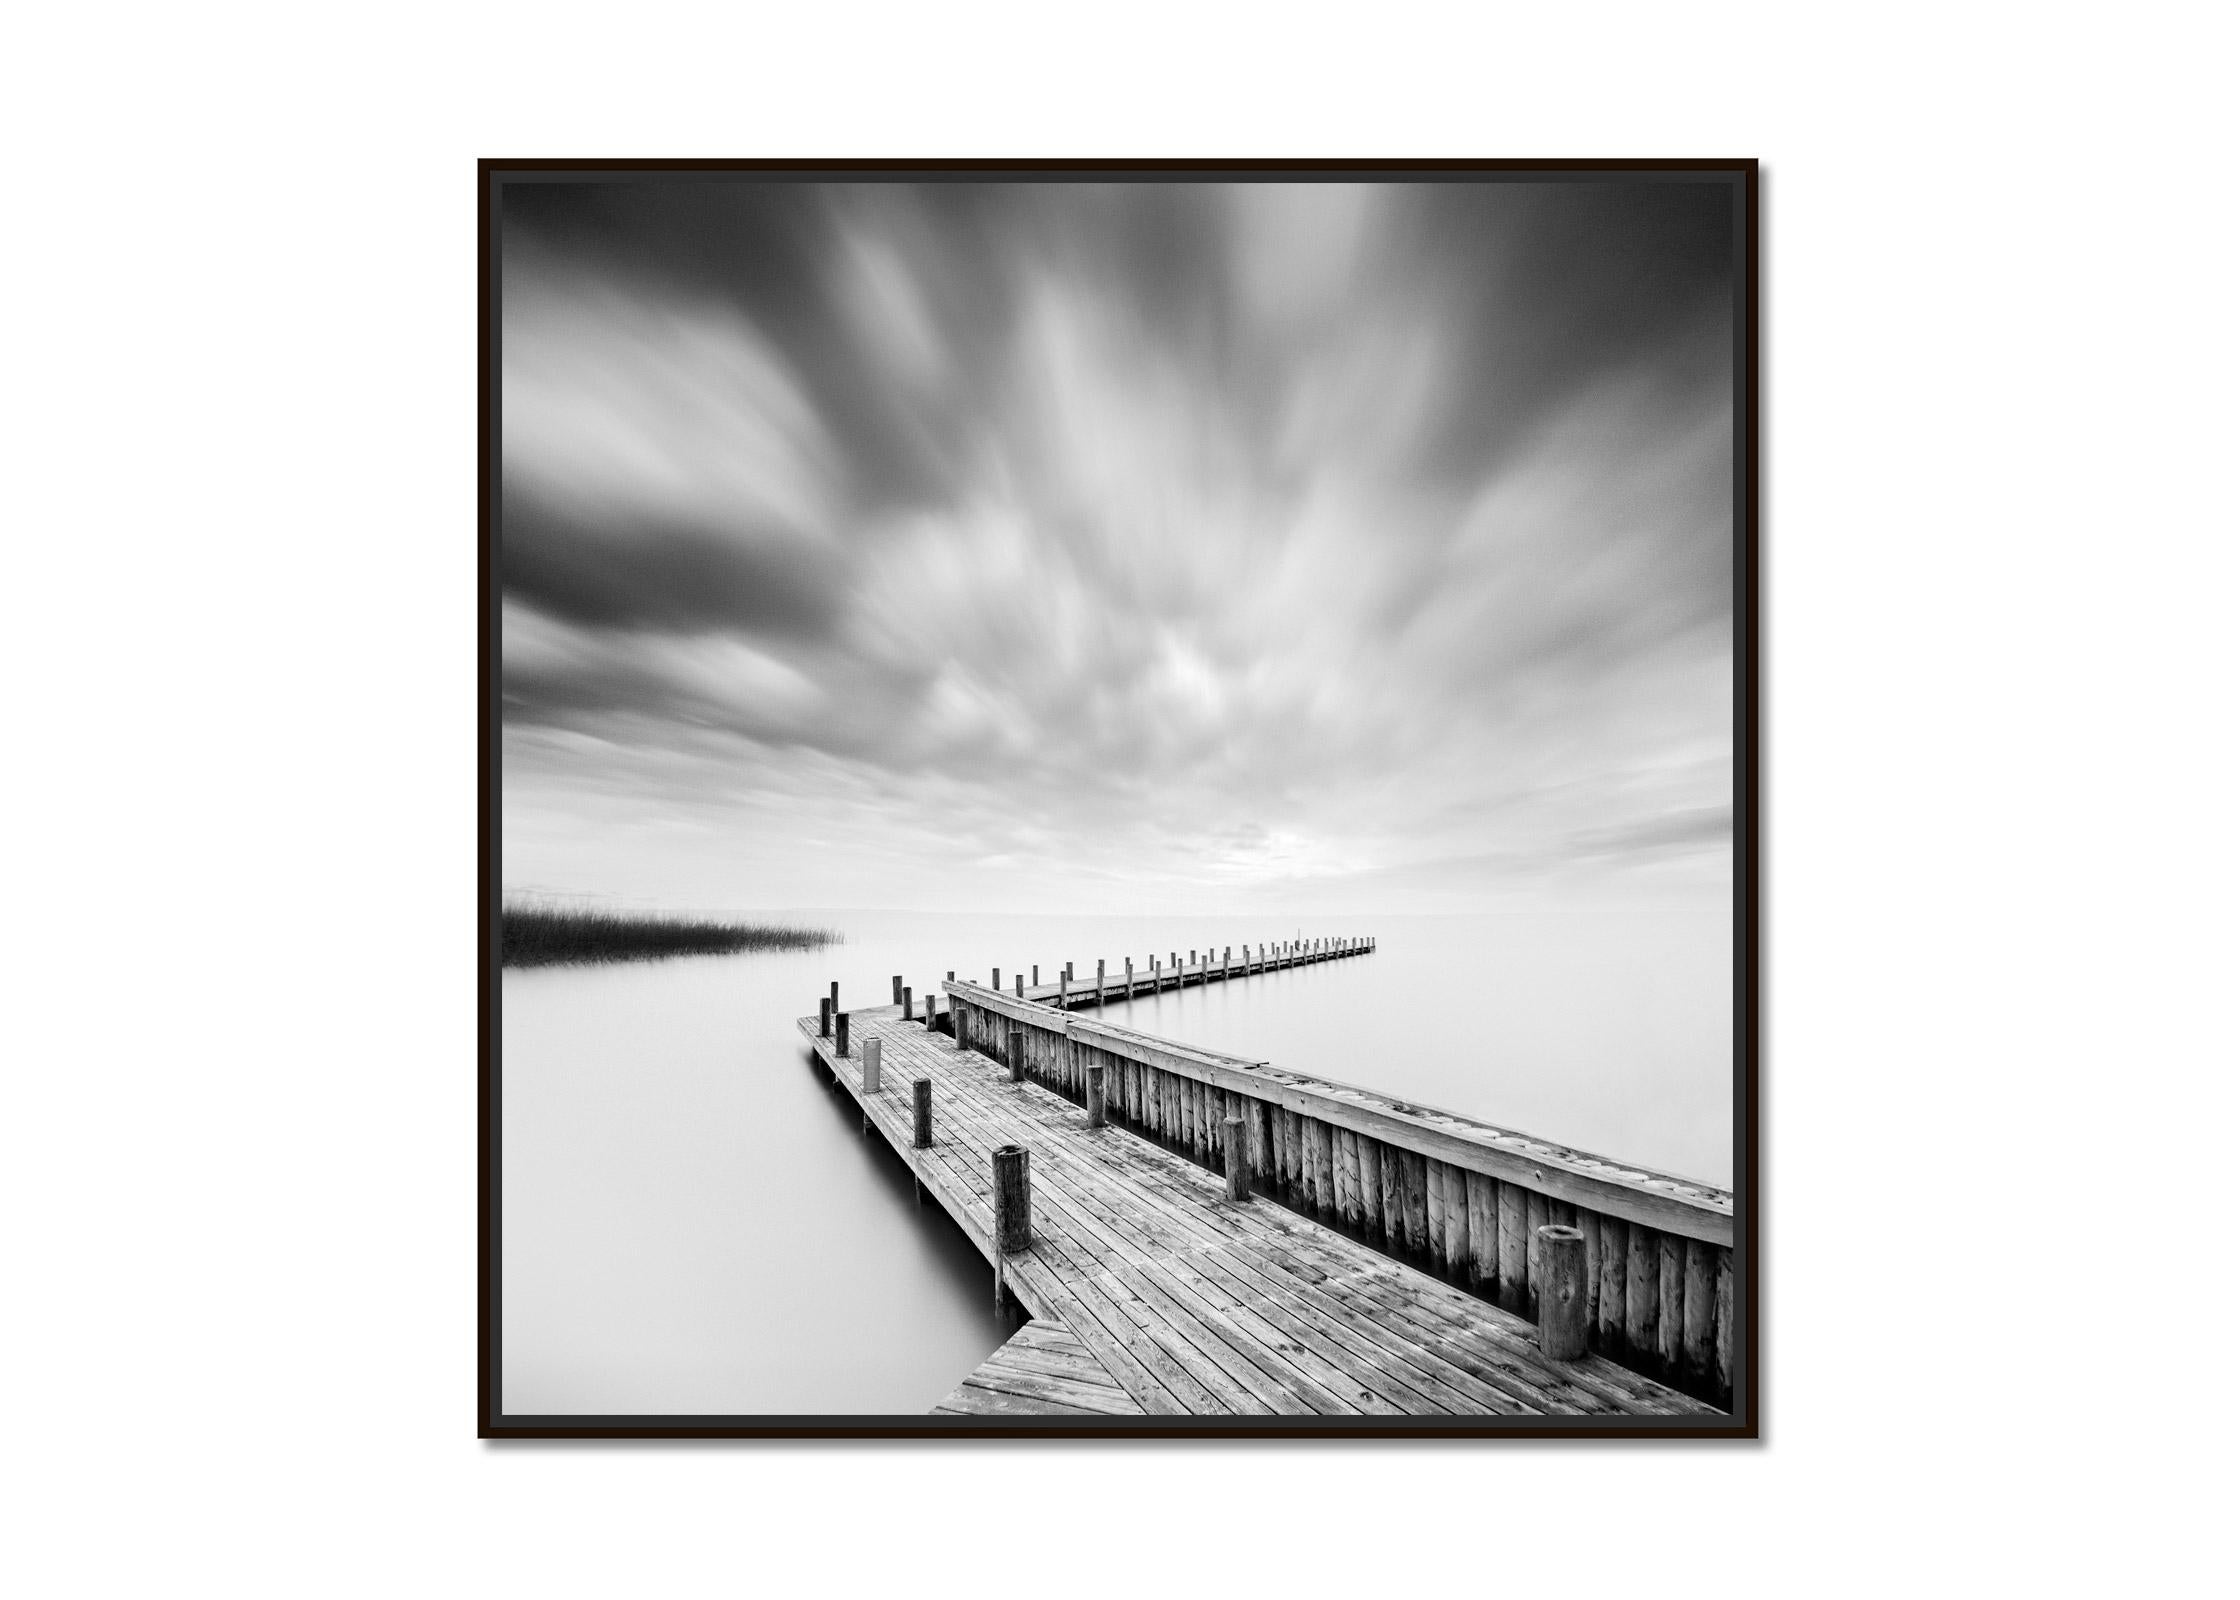 Wood Pier, lake, storm, black & white long exposure art waterscape photography - Photograph by Gerald Berghammer